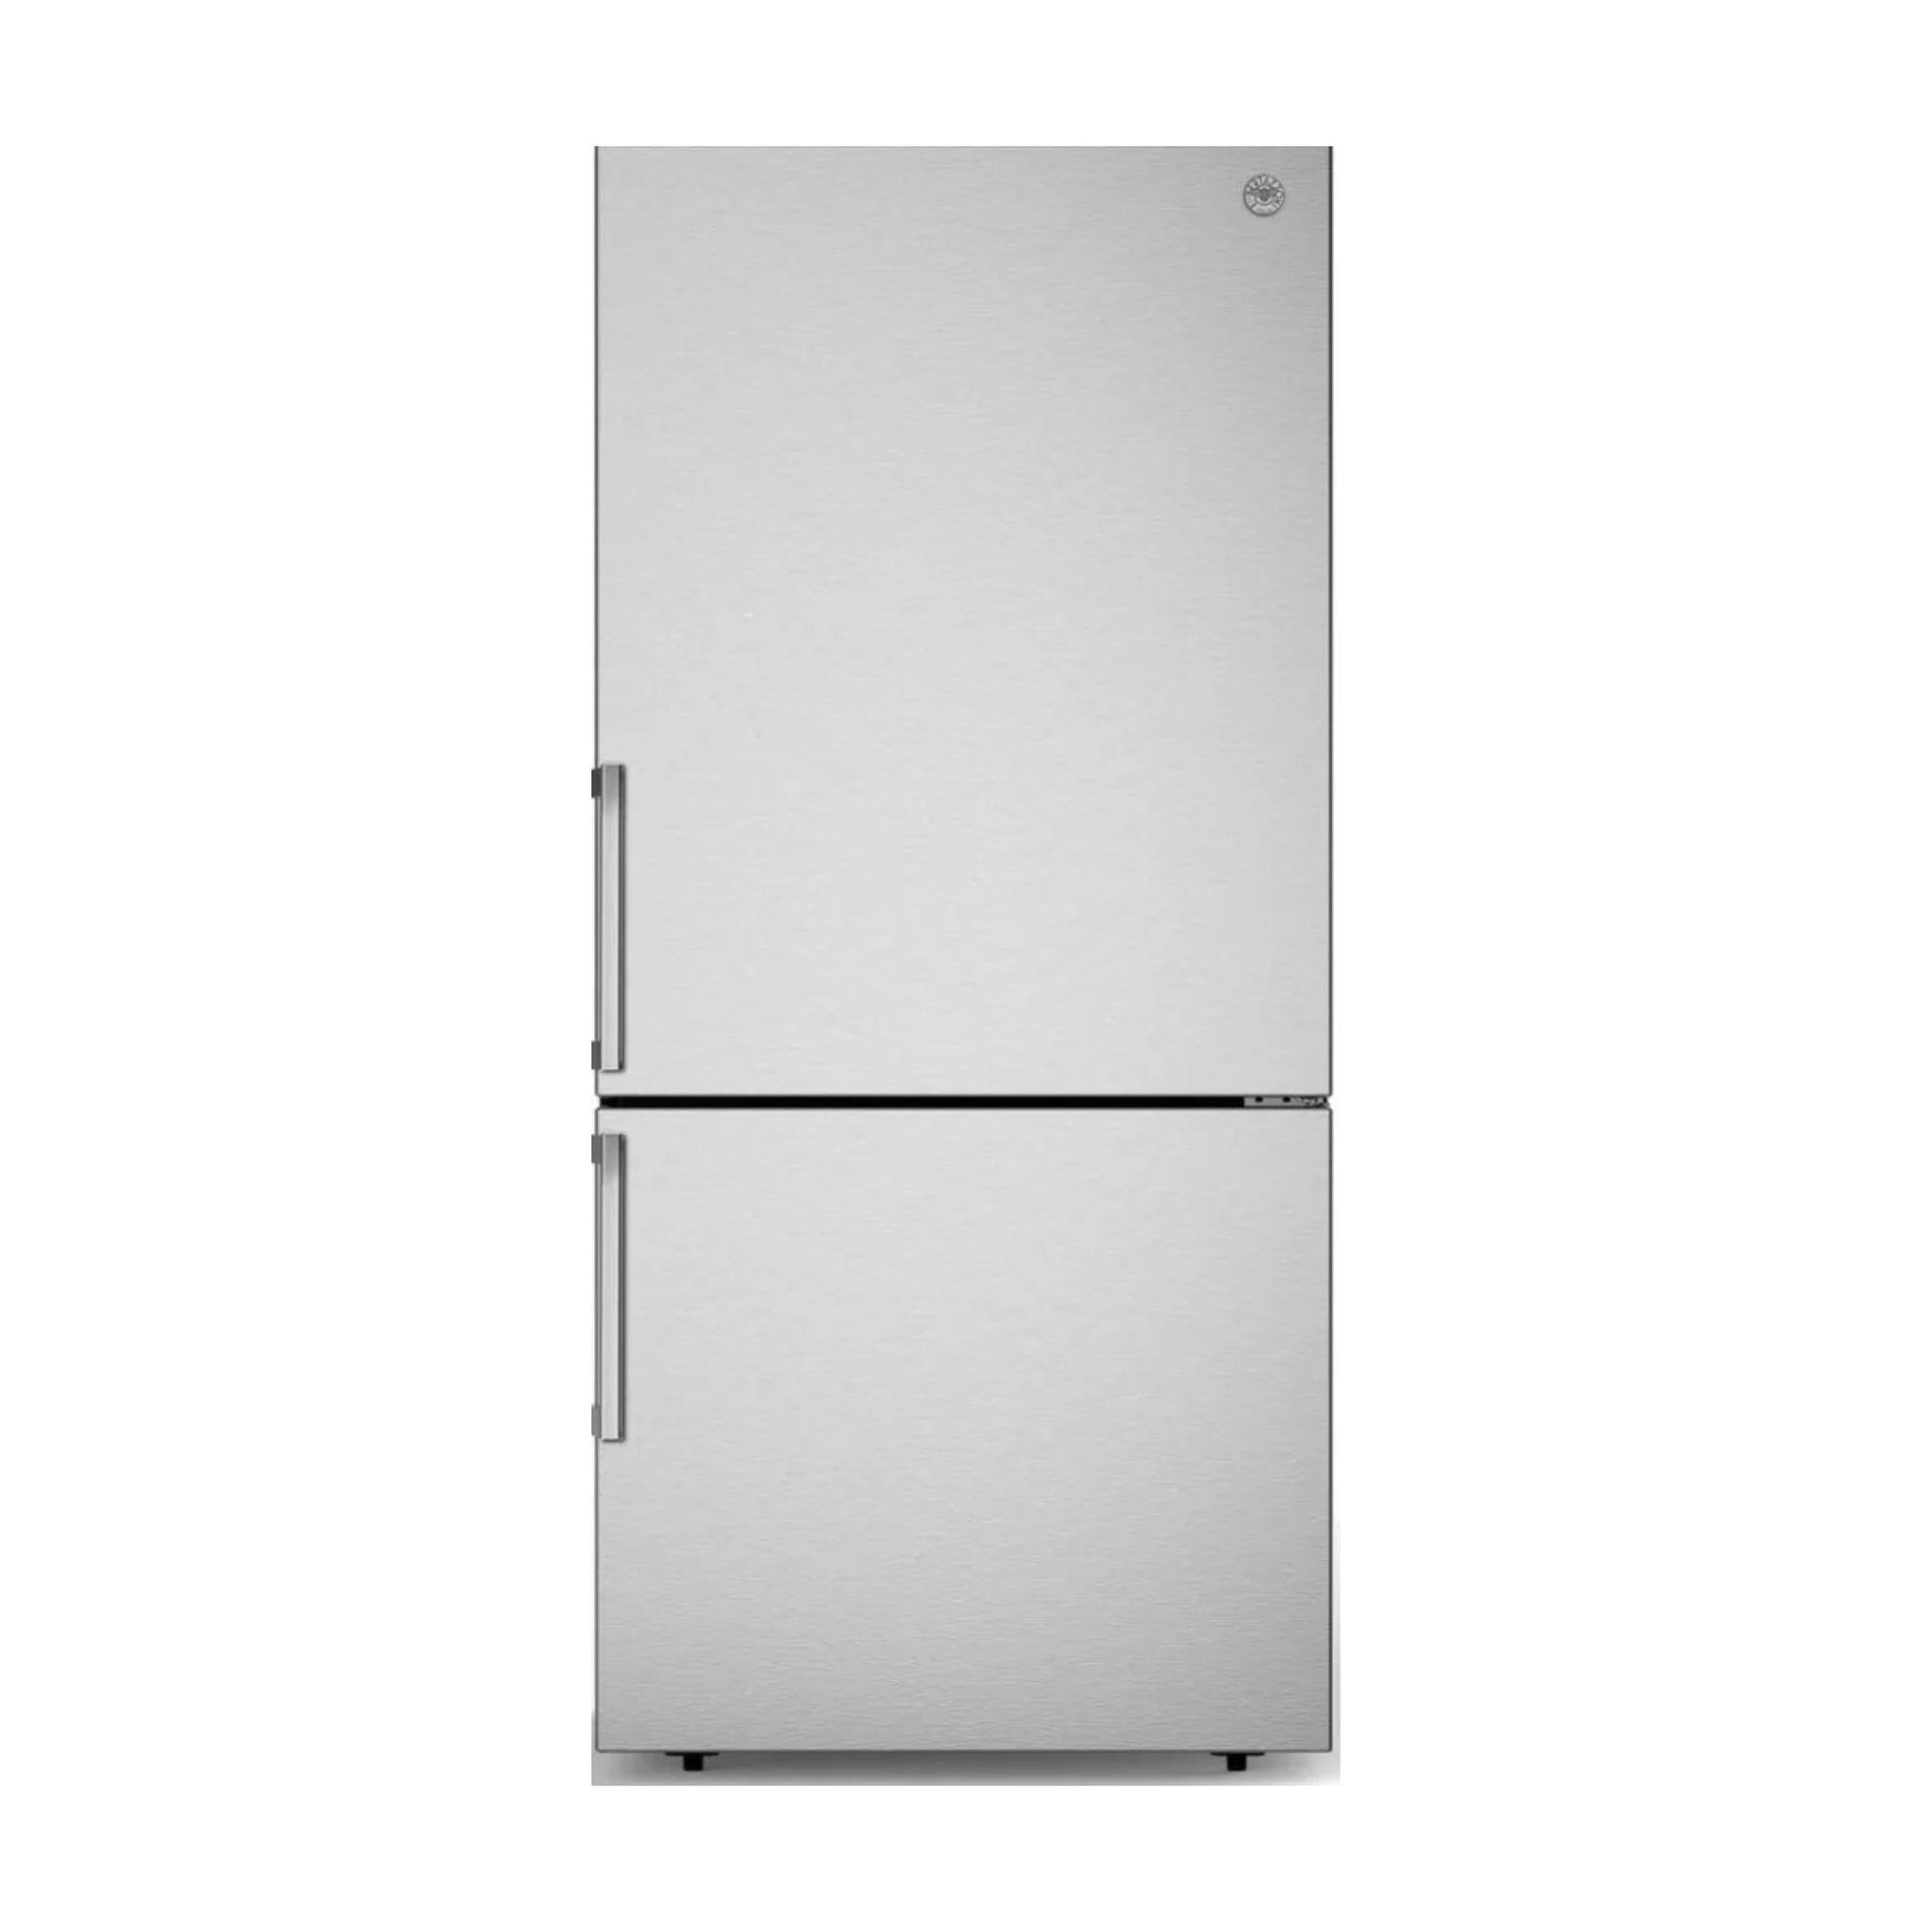 Bertazzoni 31" Counter Depth Bottom Freezer Refrigerator with 17.1 Total Capacity; Surround Cooling System - Culinary Hardware